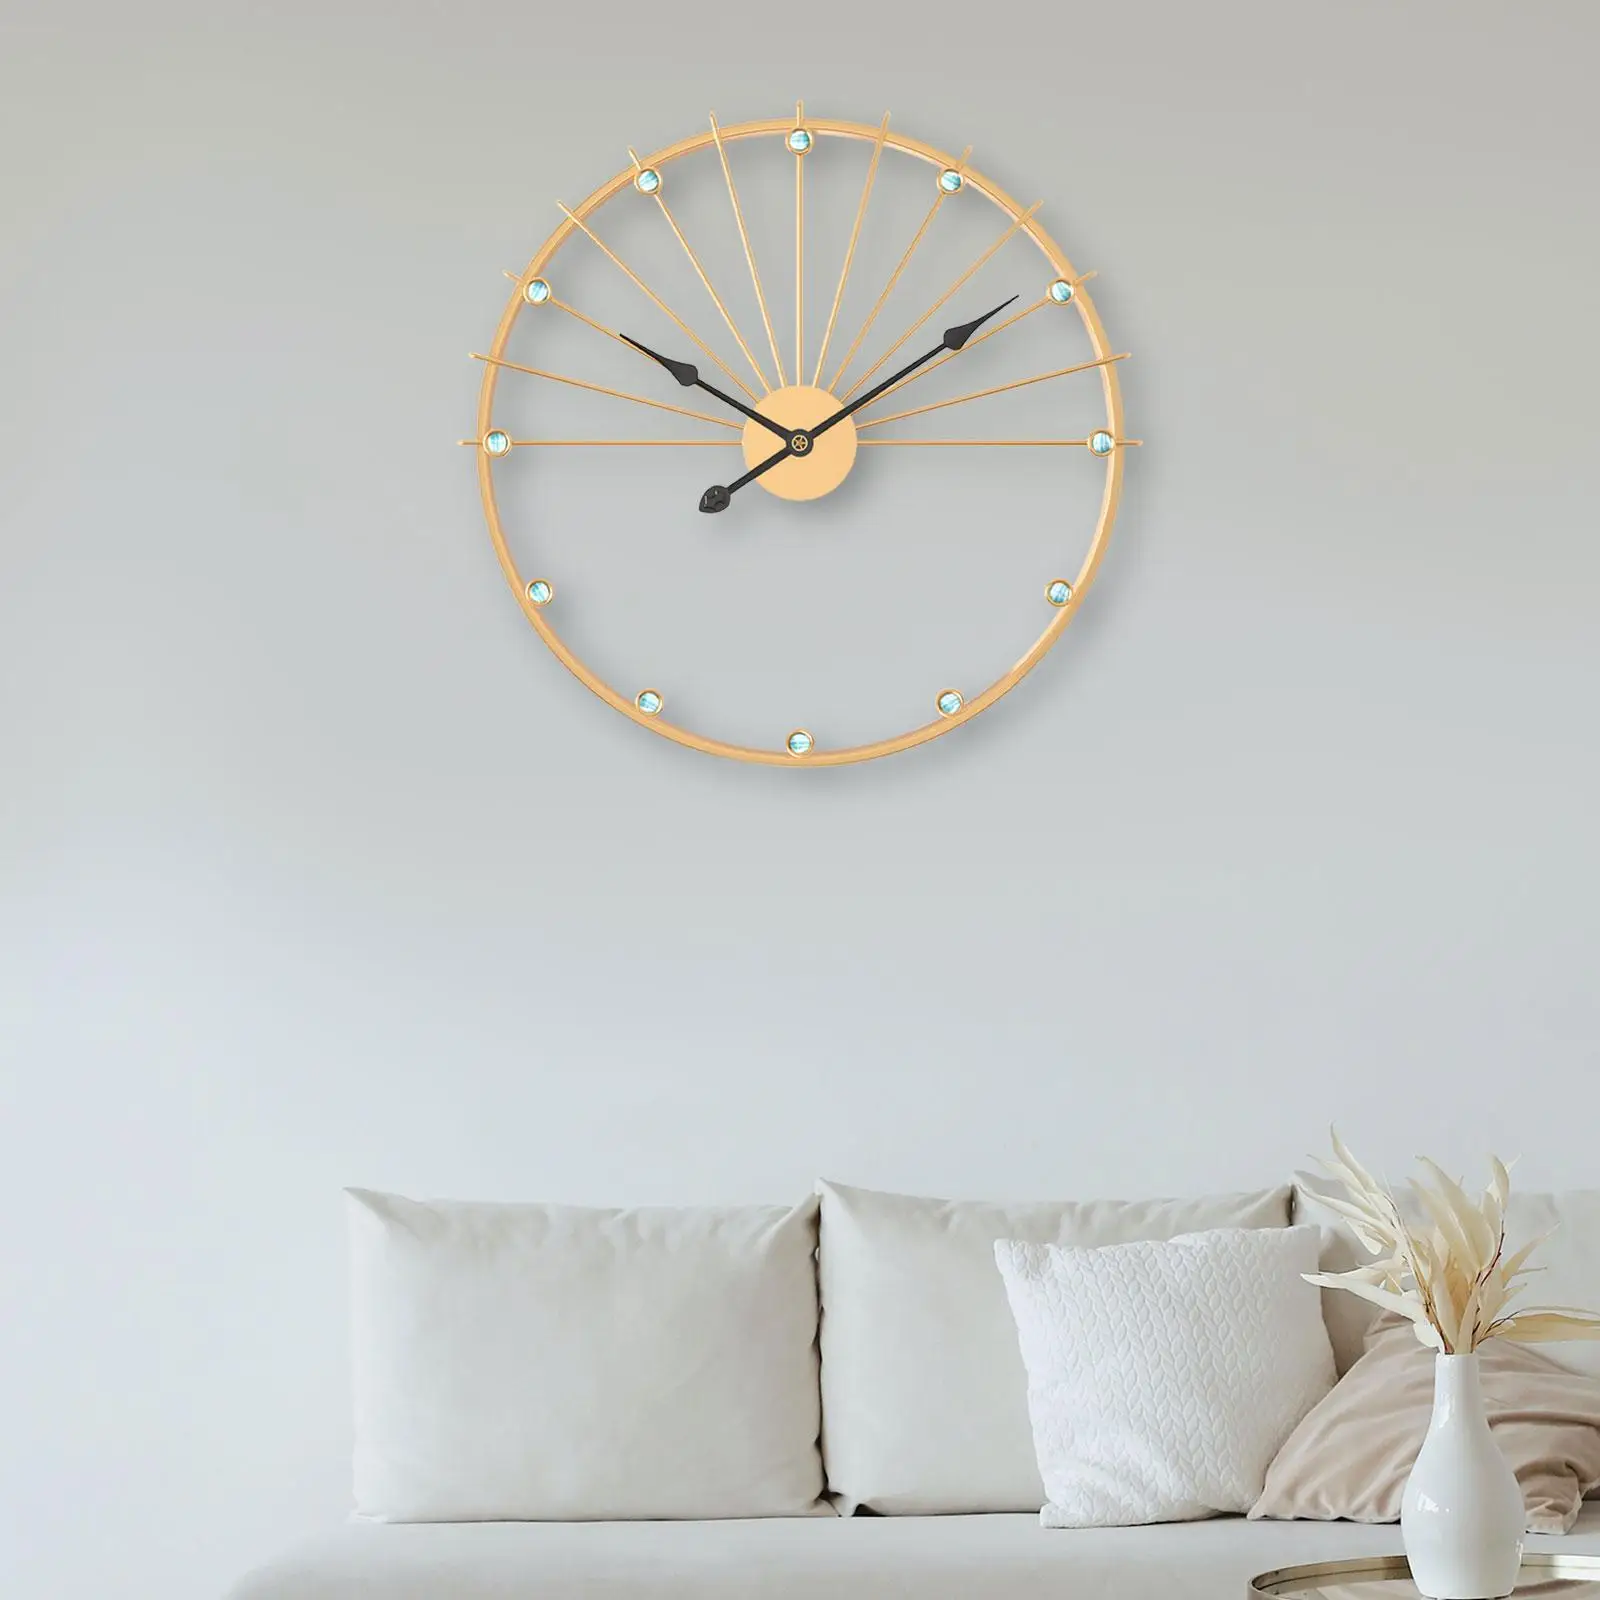 Metal Wall Clock Fashion Ornament Wall Hanging Clock Non Ticking Silent Clock for Kitchen Indoor Bedroom Dining Room Decoration